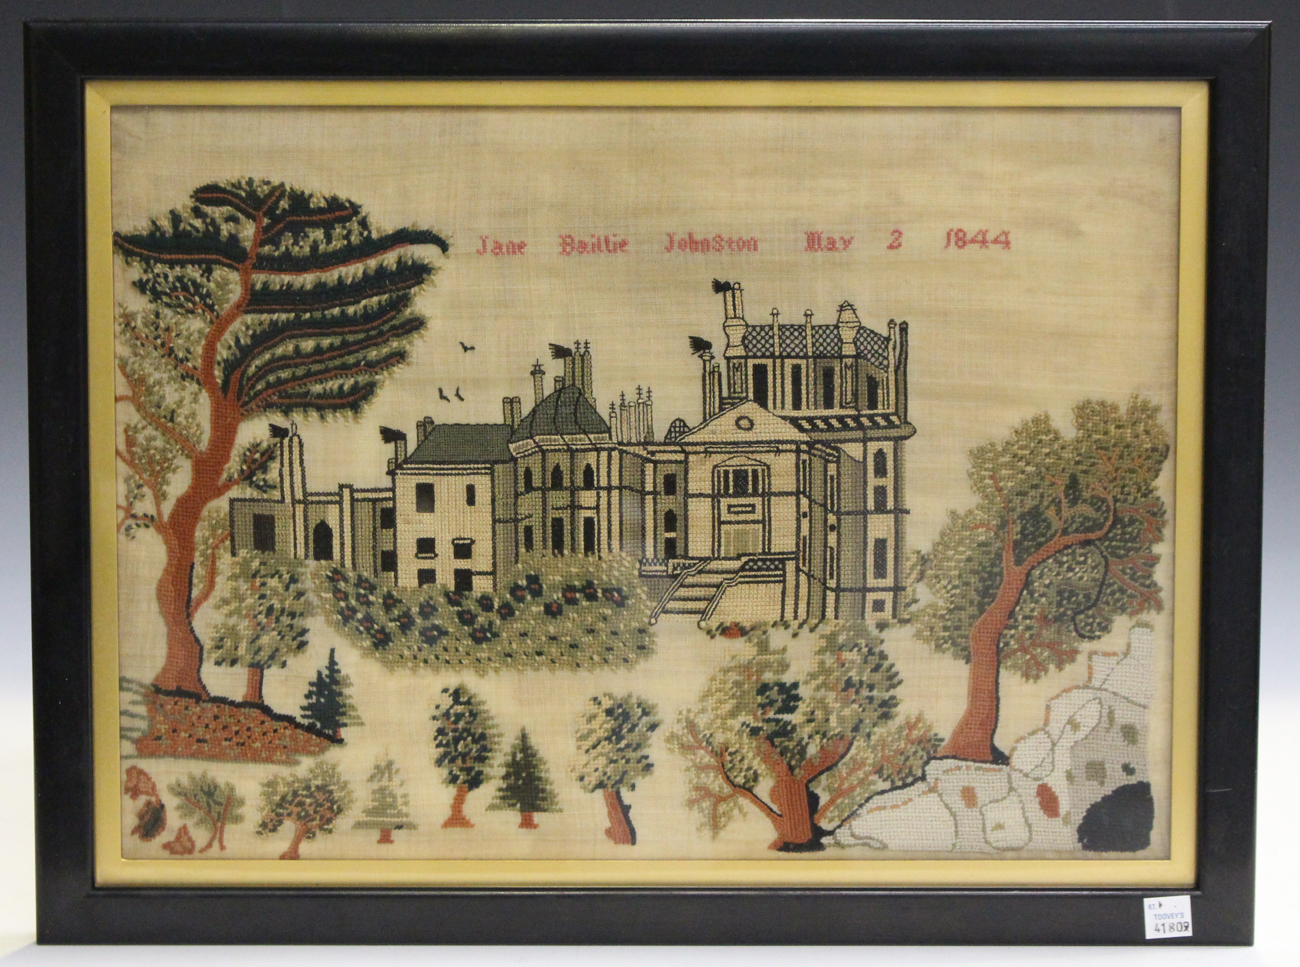 An early Victorian pictorial needlework sampler by Jane Baillie Johnston, dated May 2 1844, worked